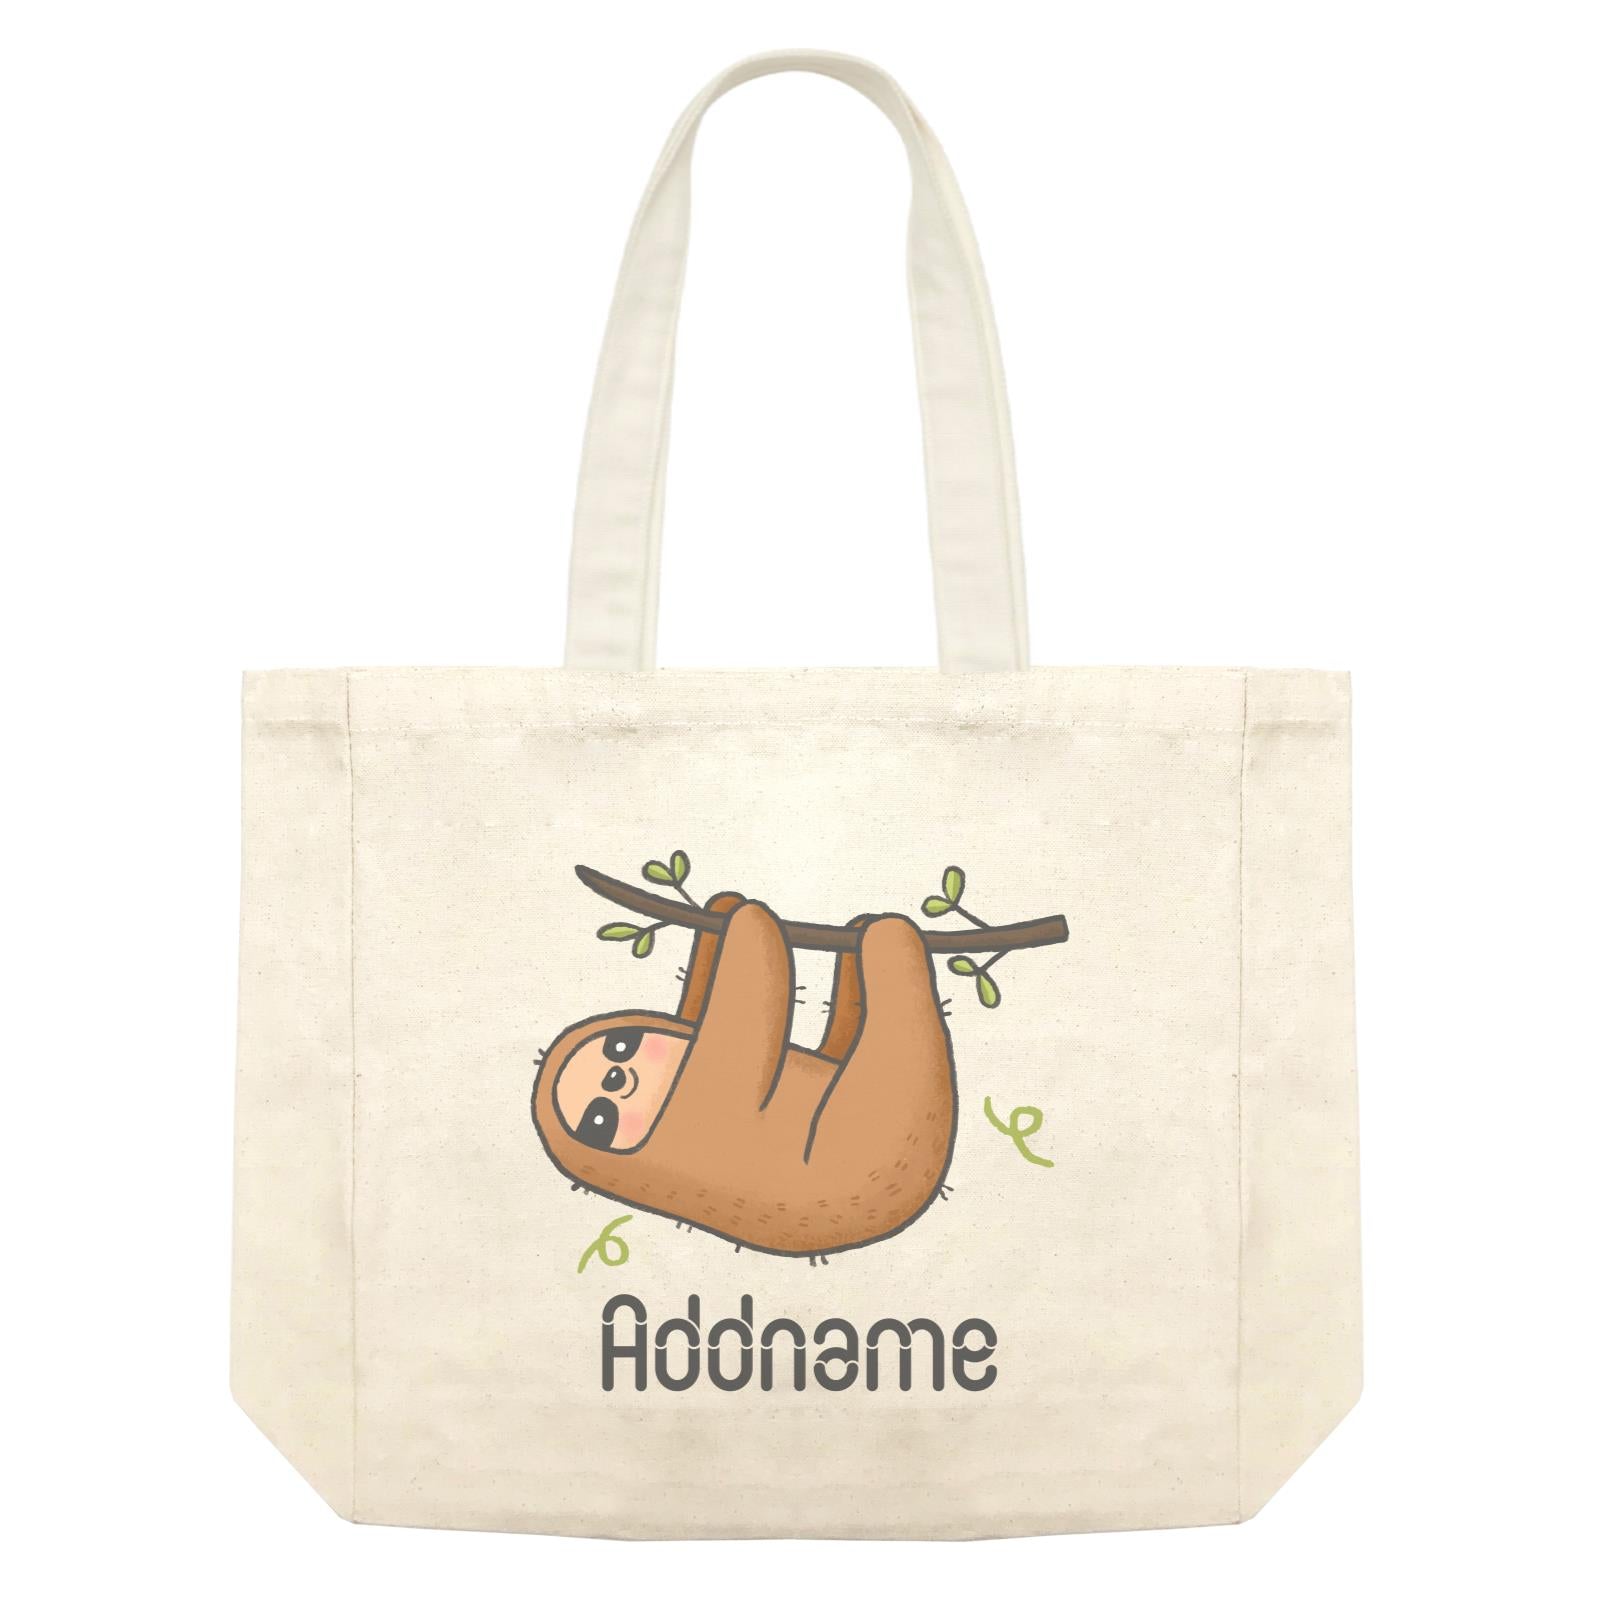 Cute Hand Drawn Style Sloth Addname Shopping Bag